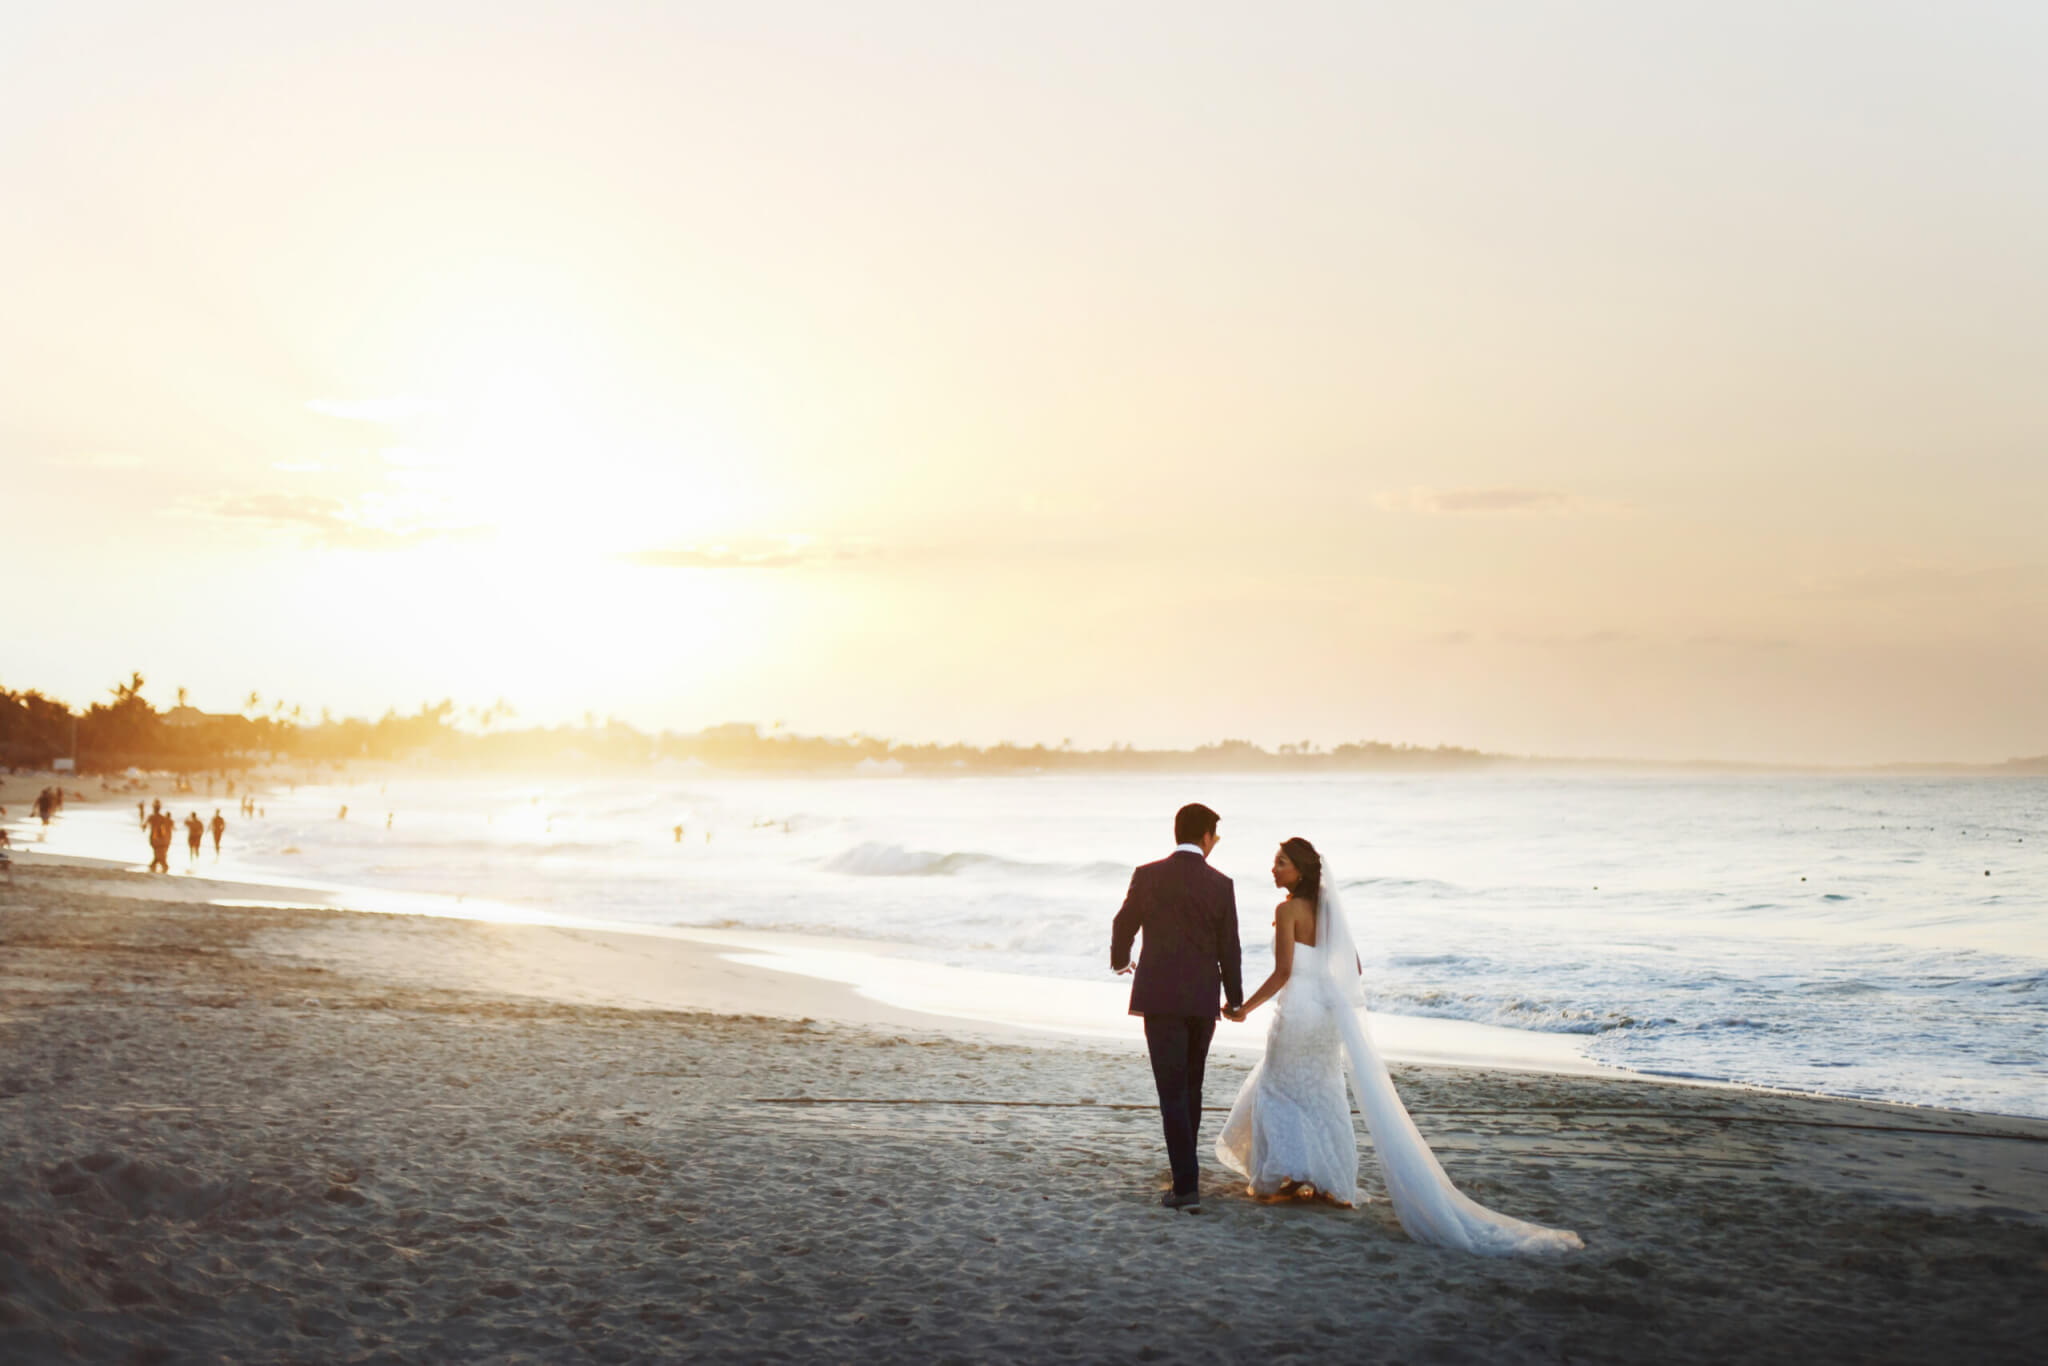 7 Reasons to Have a Destination Wedding